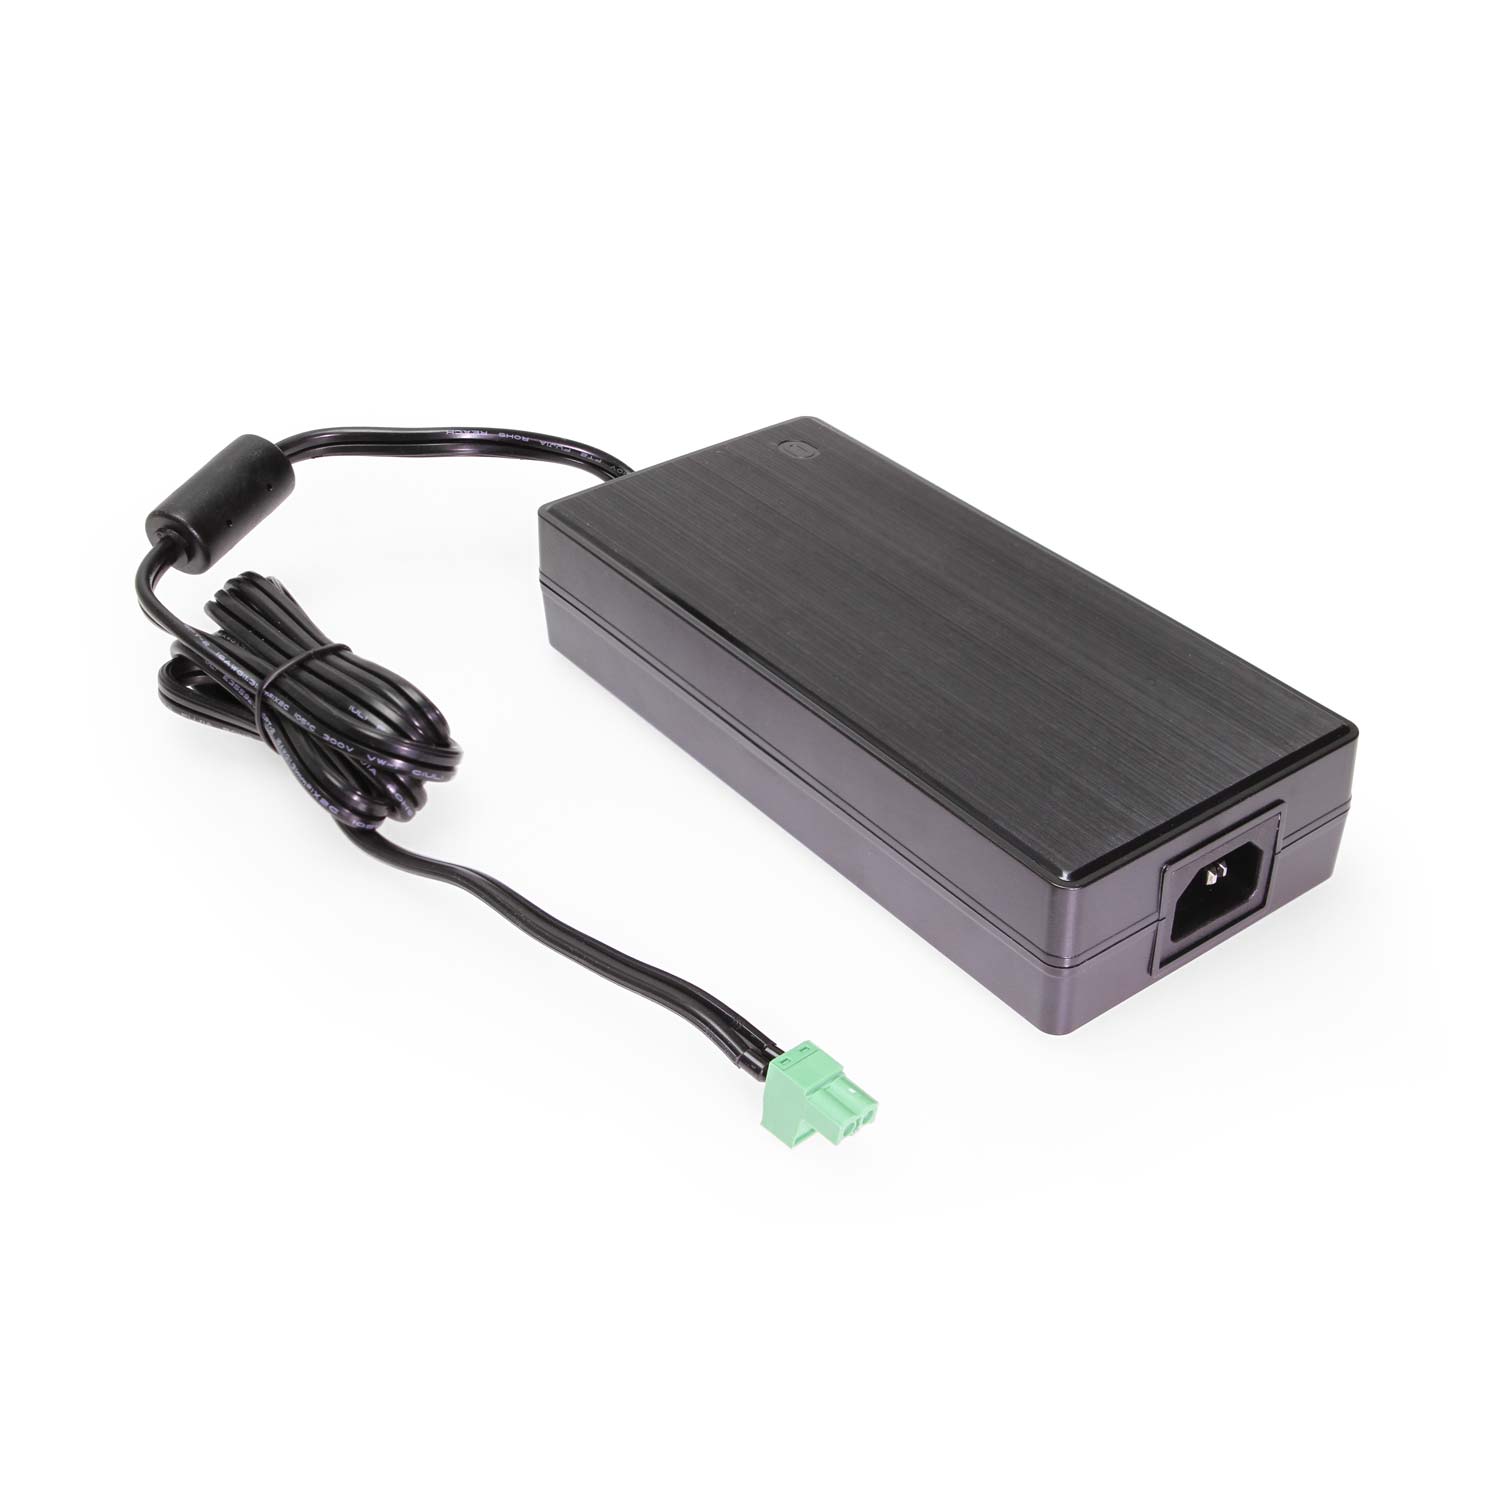 12V 6A Power Supply for 3 Pin USB Hub Power B Configuration - Coolgear